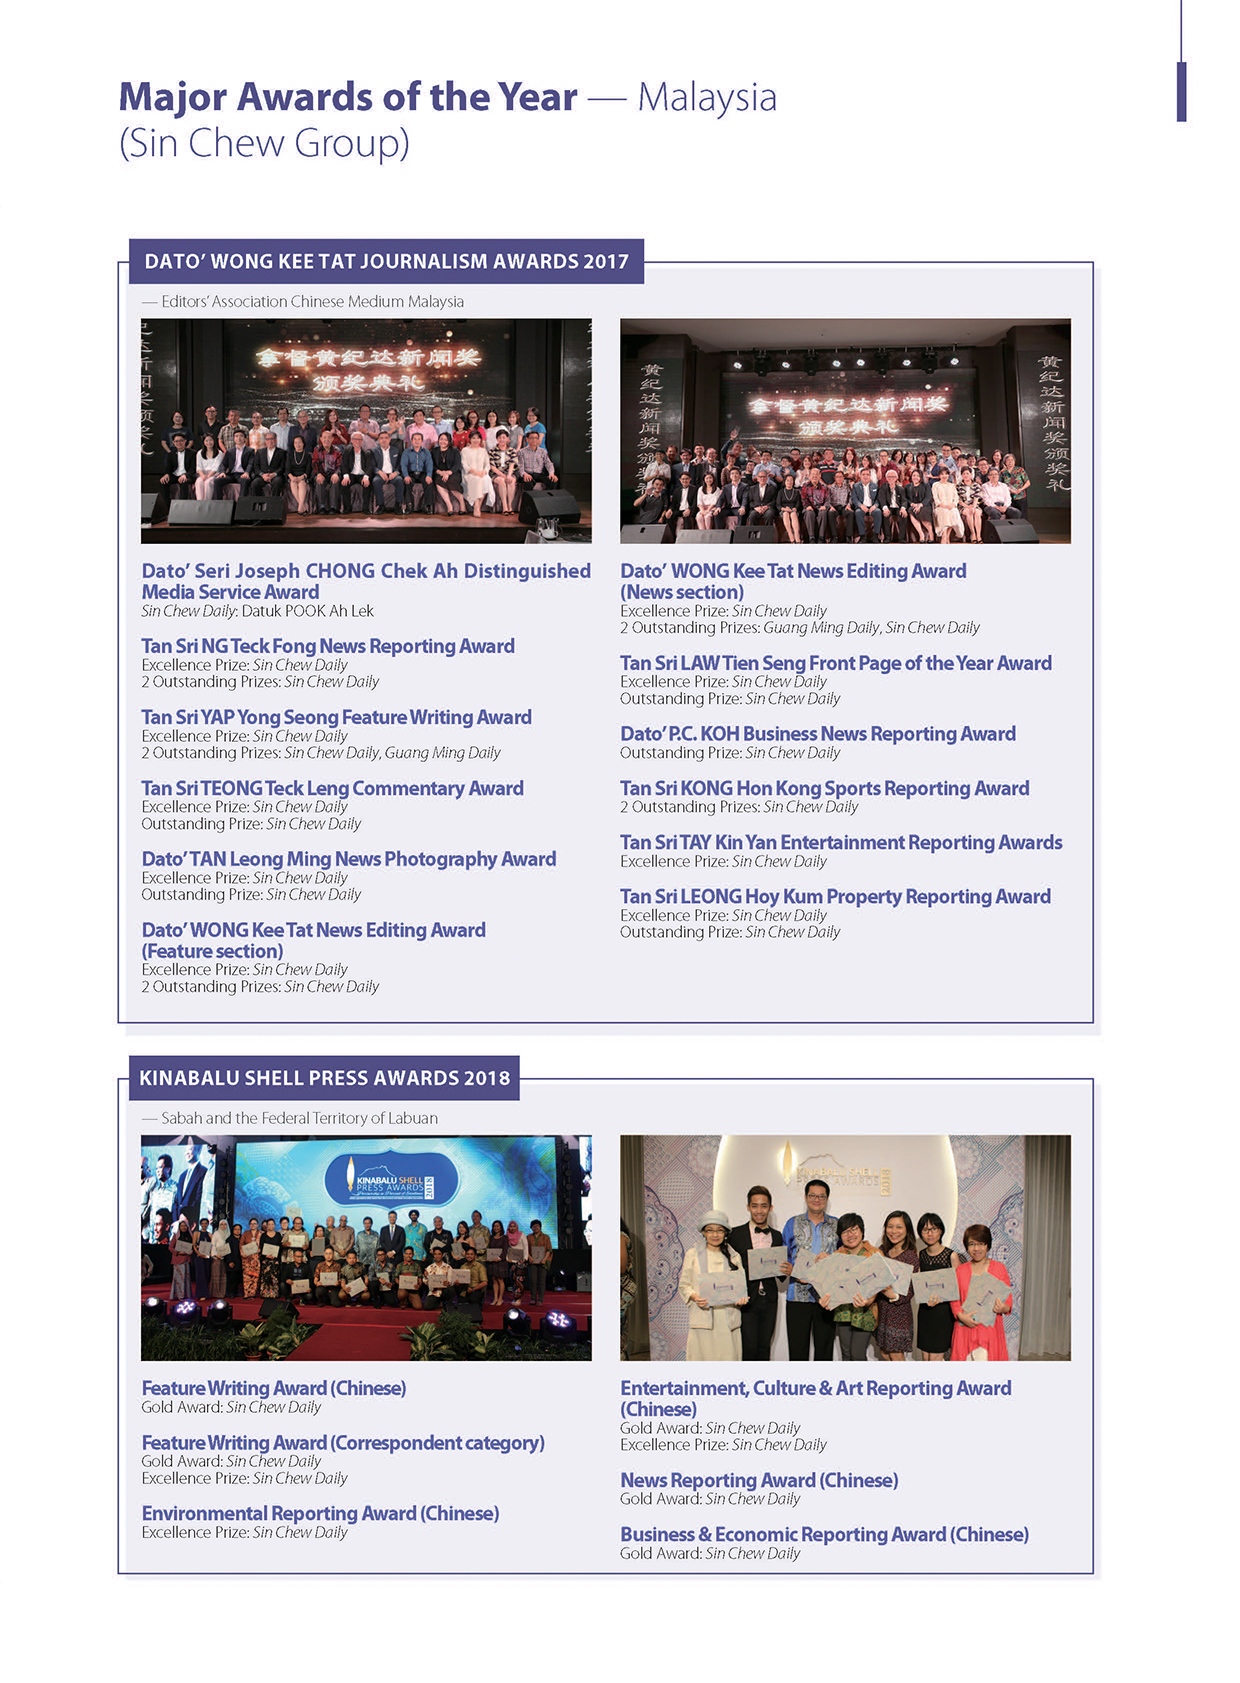 Major Awards of the Year 2019-Malaysia (Sin Chew Group)